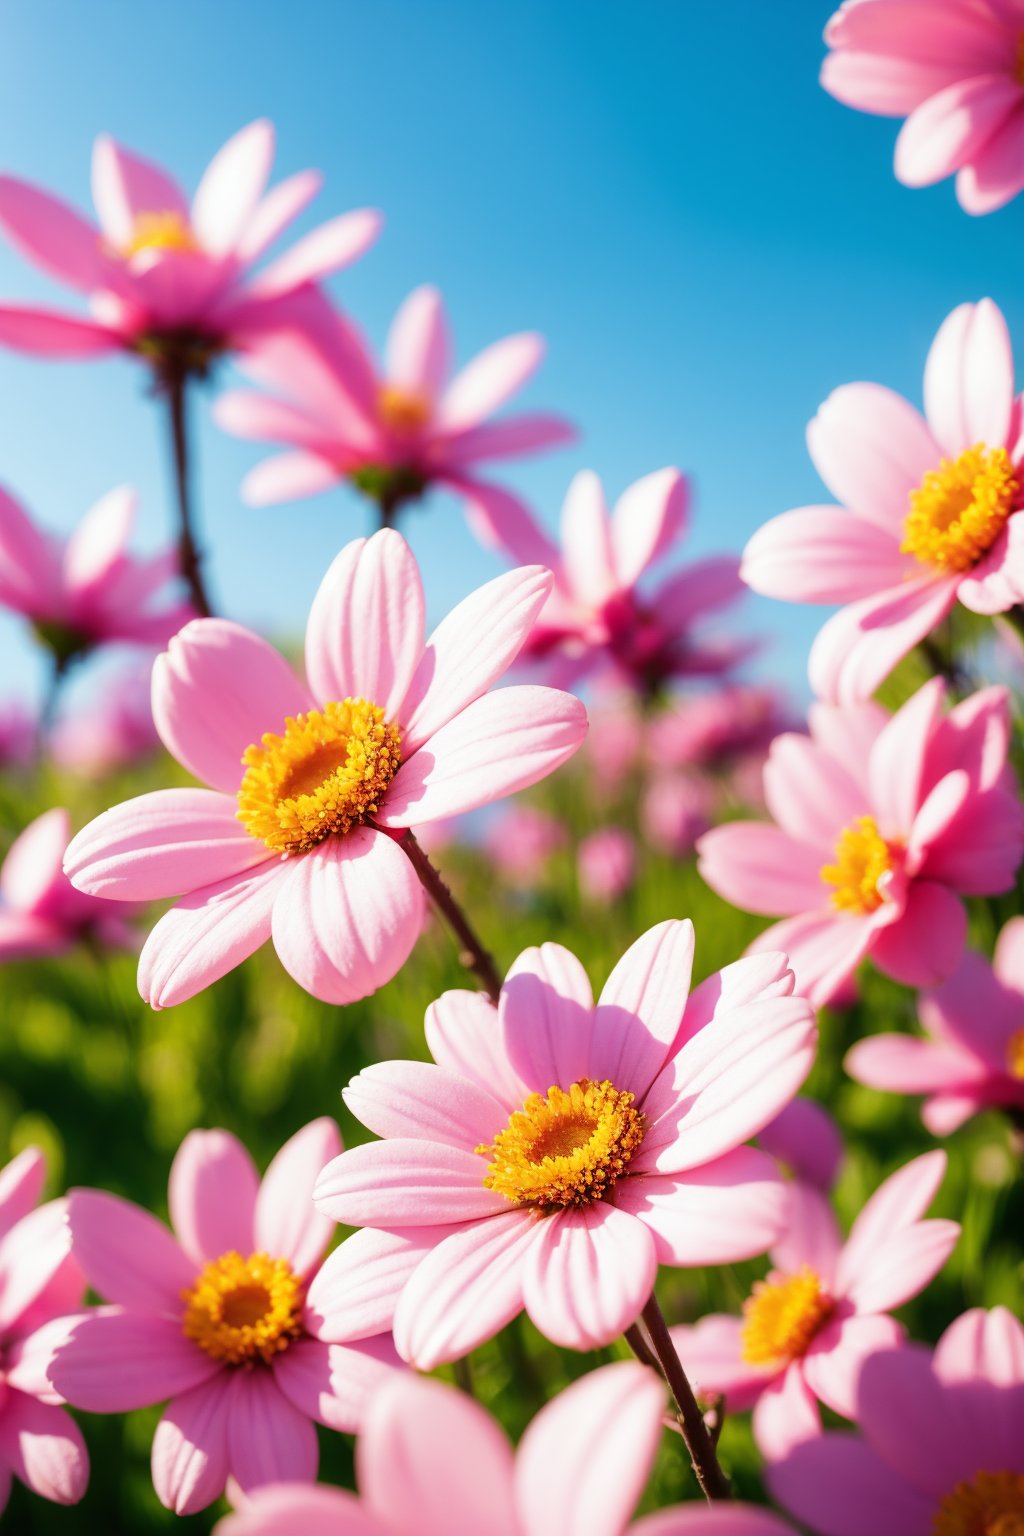 blue sky, blurry, blurry background, blurry foreground, branch, cherry blossoms, cloud, daisy, day, depth of field, flower, lily \(flower\), motion blur, outdoors, petals, pink flower, sky, spring \(season\), white flower